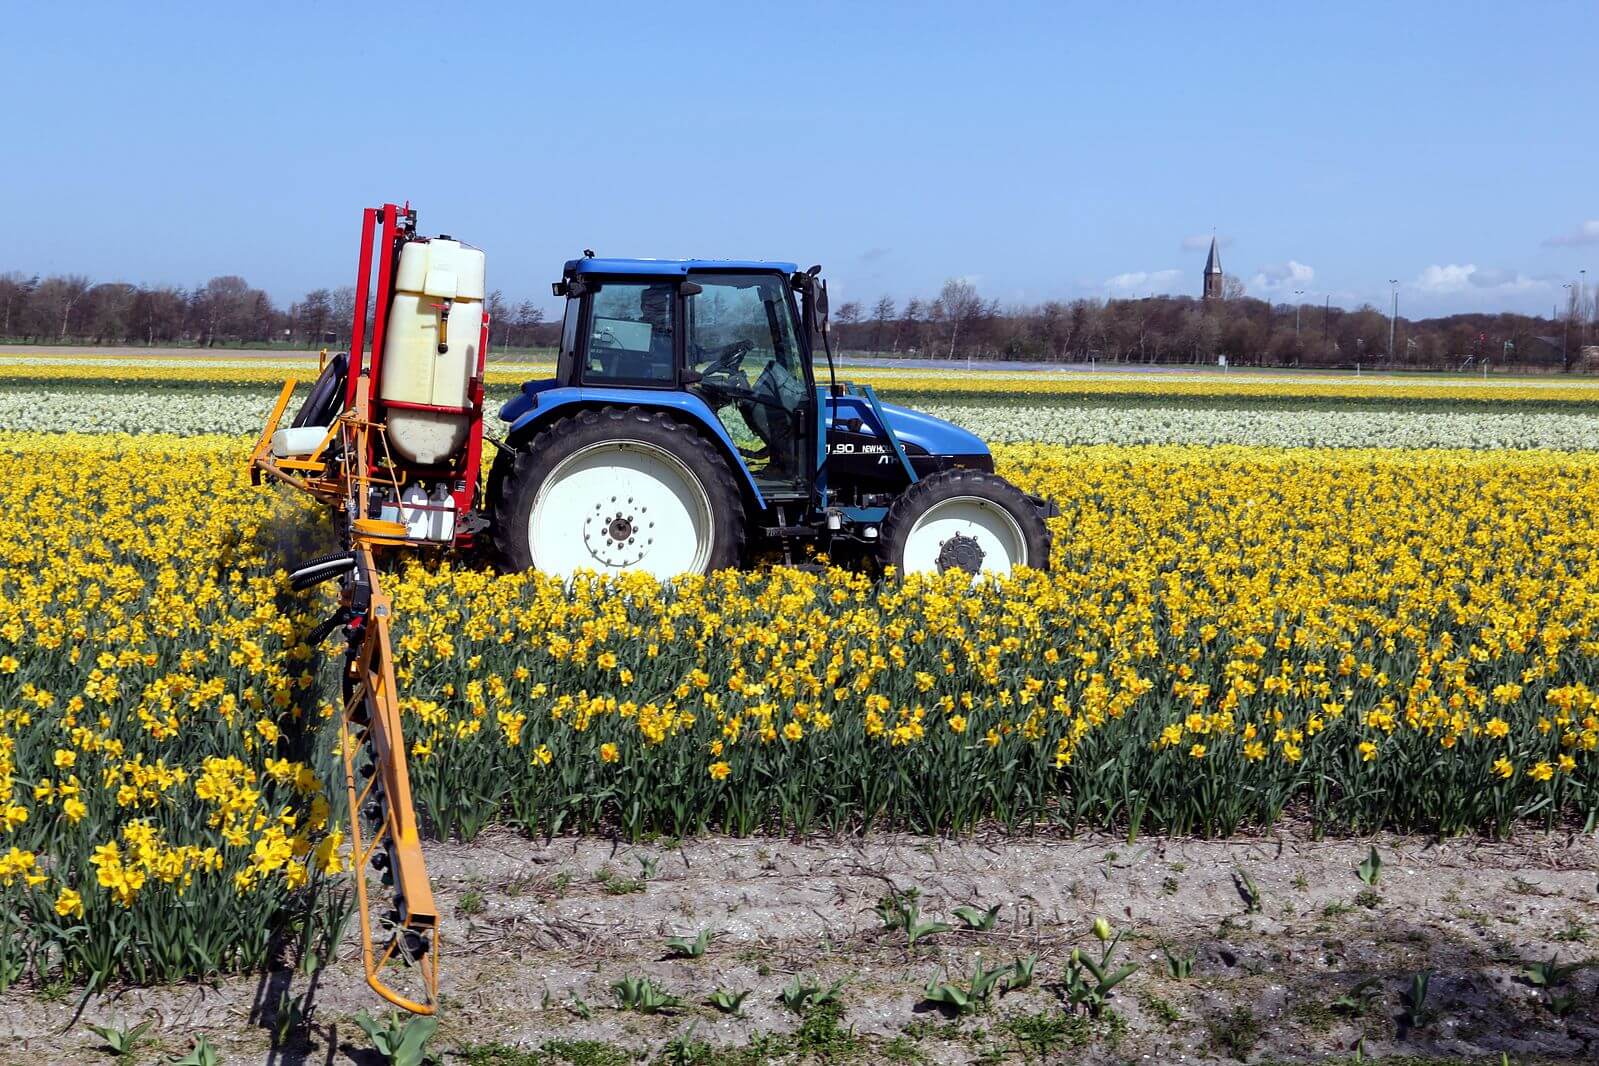 New Holland TL and field sprayer